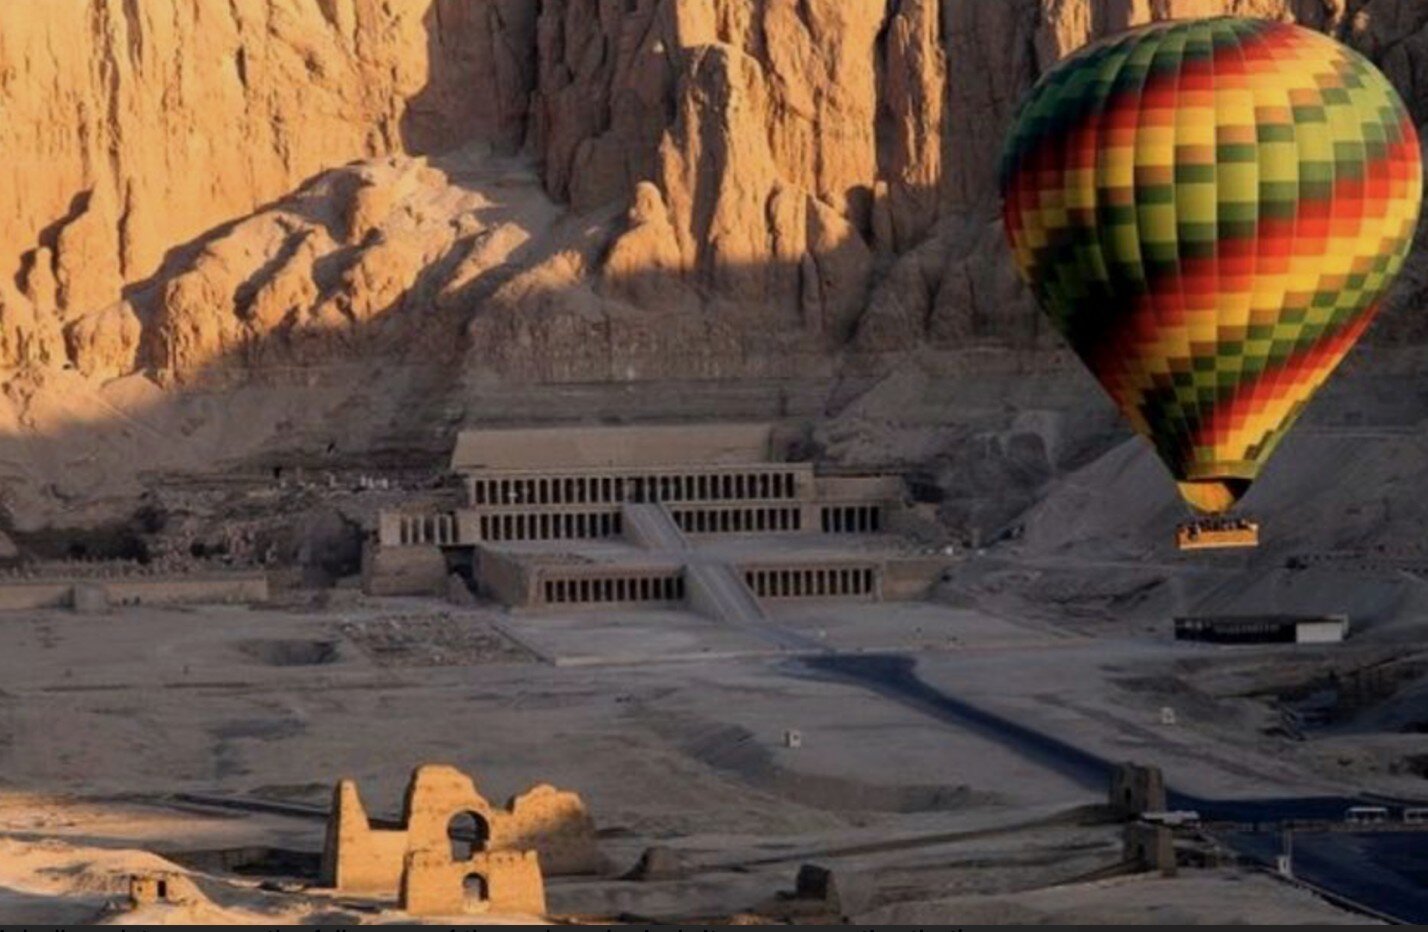 One of the highlights of our 8 Day retreat in Egypt! ✨𐦉

Soaring above Luxor in a hot air balloon 🎈giving us  a panoramic view of the entire archaeological site in the Valley Of The Kings, with a perspective that is impossible to attain from the gr